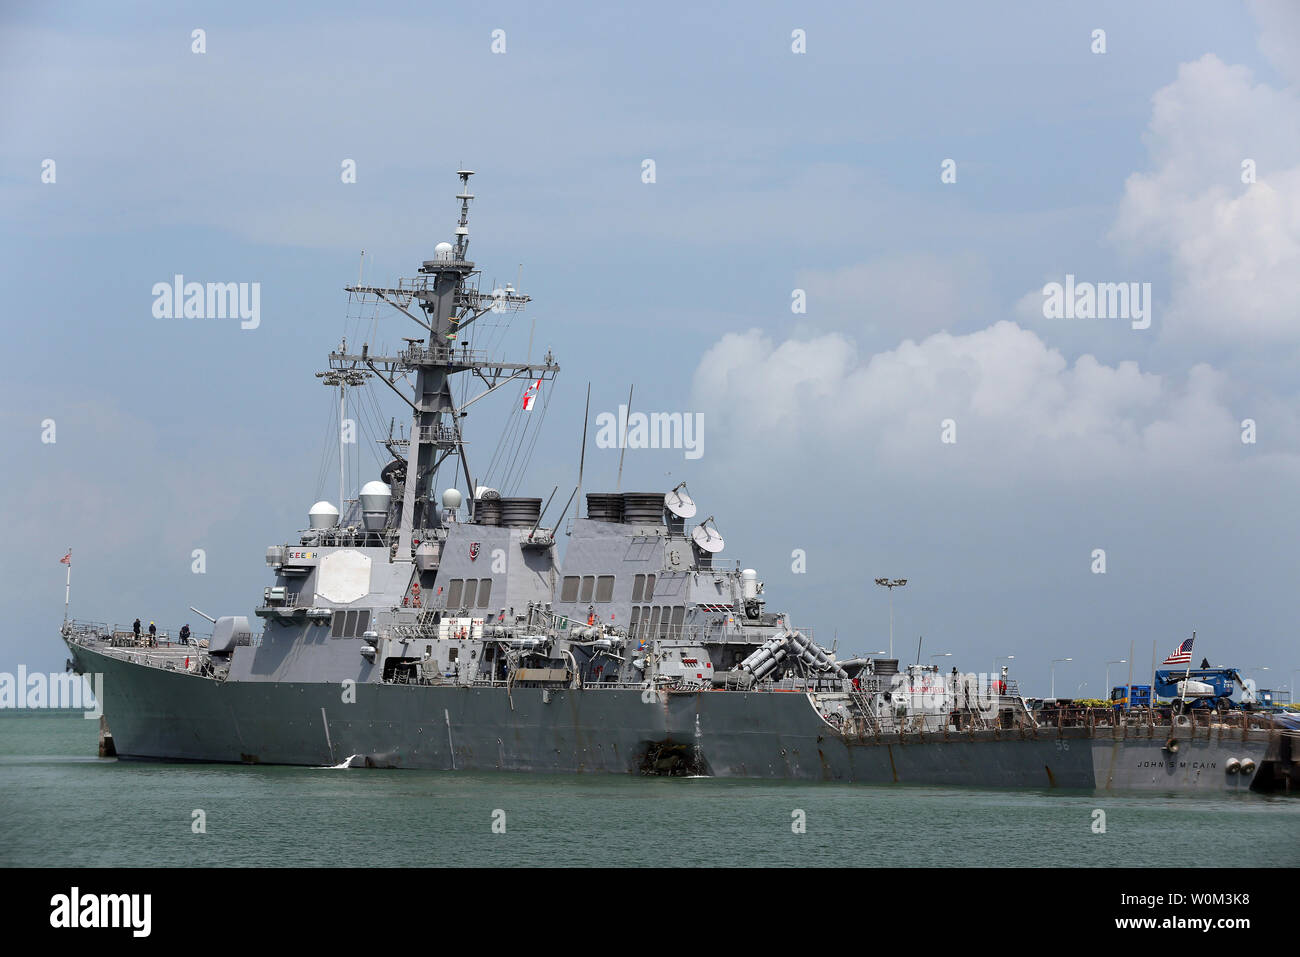 Guided-missile destroyer USS John S. McCain (DDG 56) moored pier side at Changi Naval Base, Republic of Singapore, on August 21, 2017, following a collision with the merchant vessel Alnic MC while underway east of the Straits of Malacca and Singapore earlier that day. Significant damage to the hull resulted in flooding to nearby compartments, including crew berthing, machinery, and communications rooms. Damage control efforts by the crew halted further flooding. The incident will be investigated. Photo by Grady T. Fontana/U.S. Navy/UPI Stock Photo